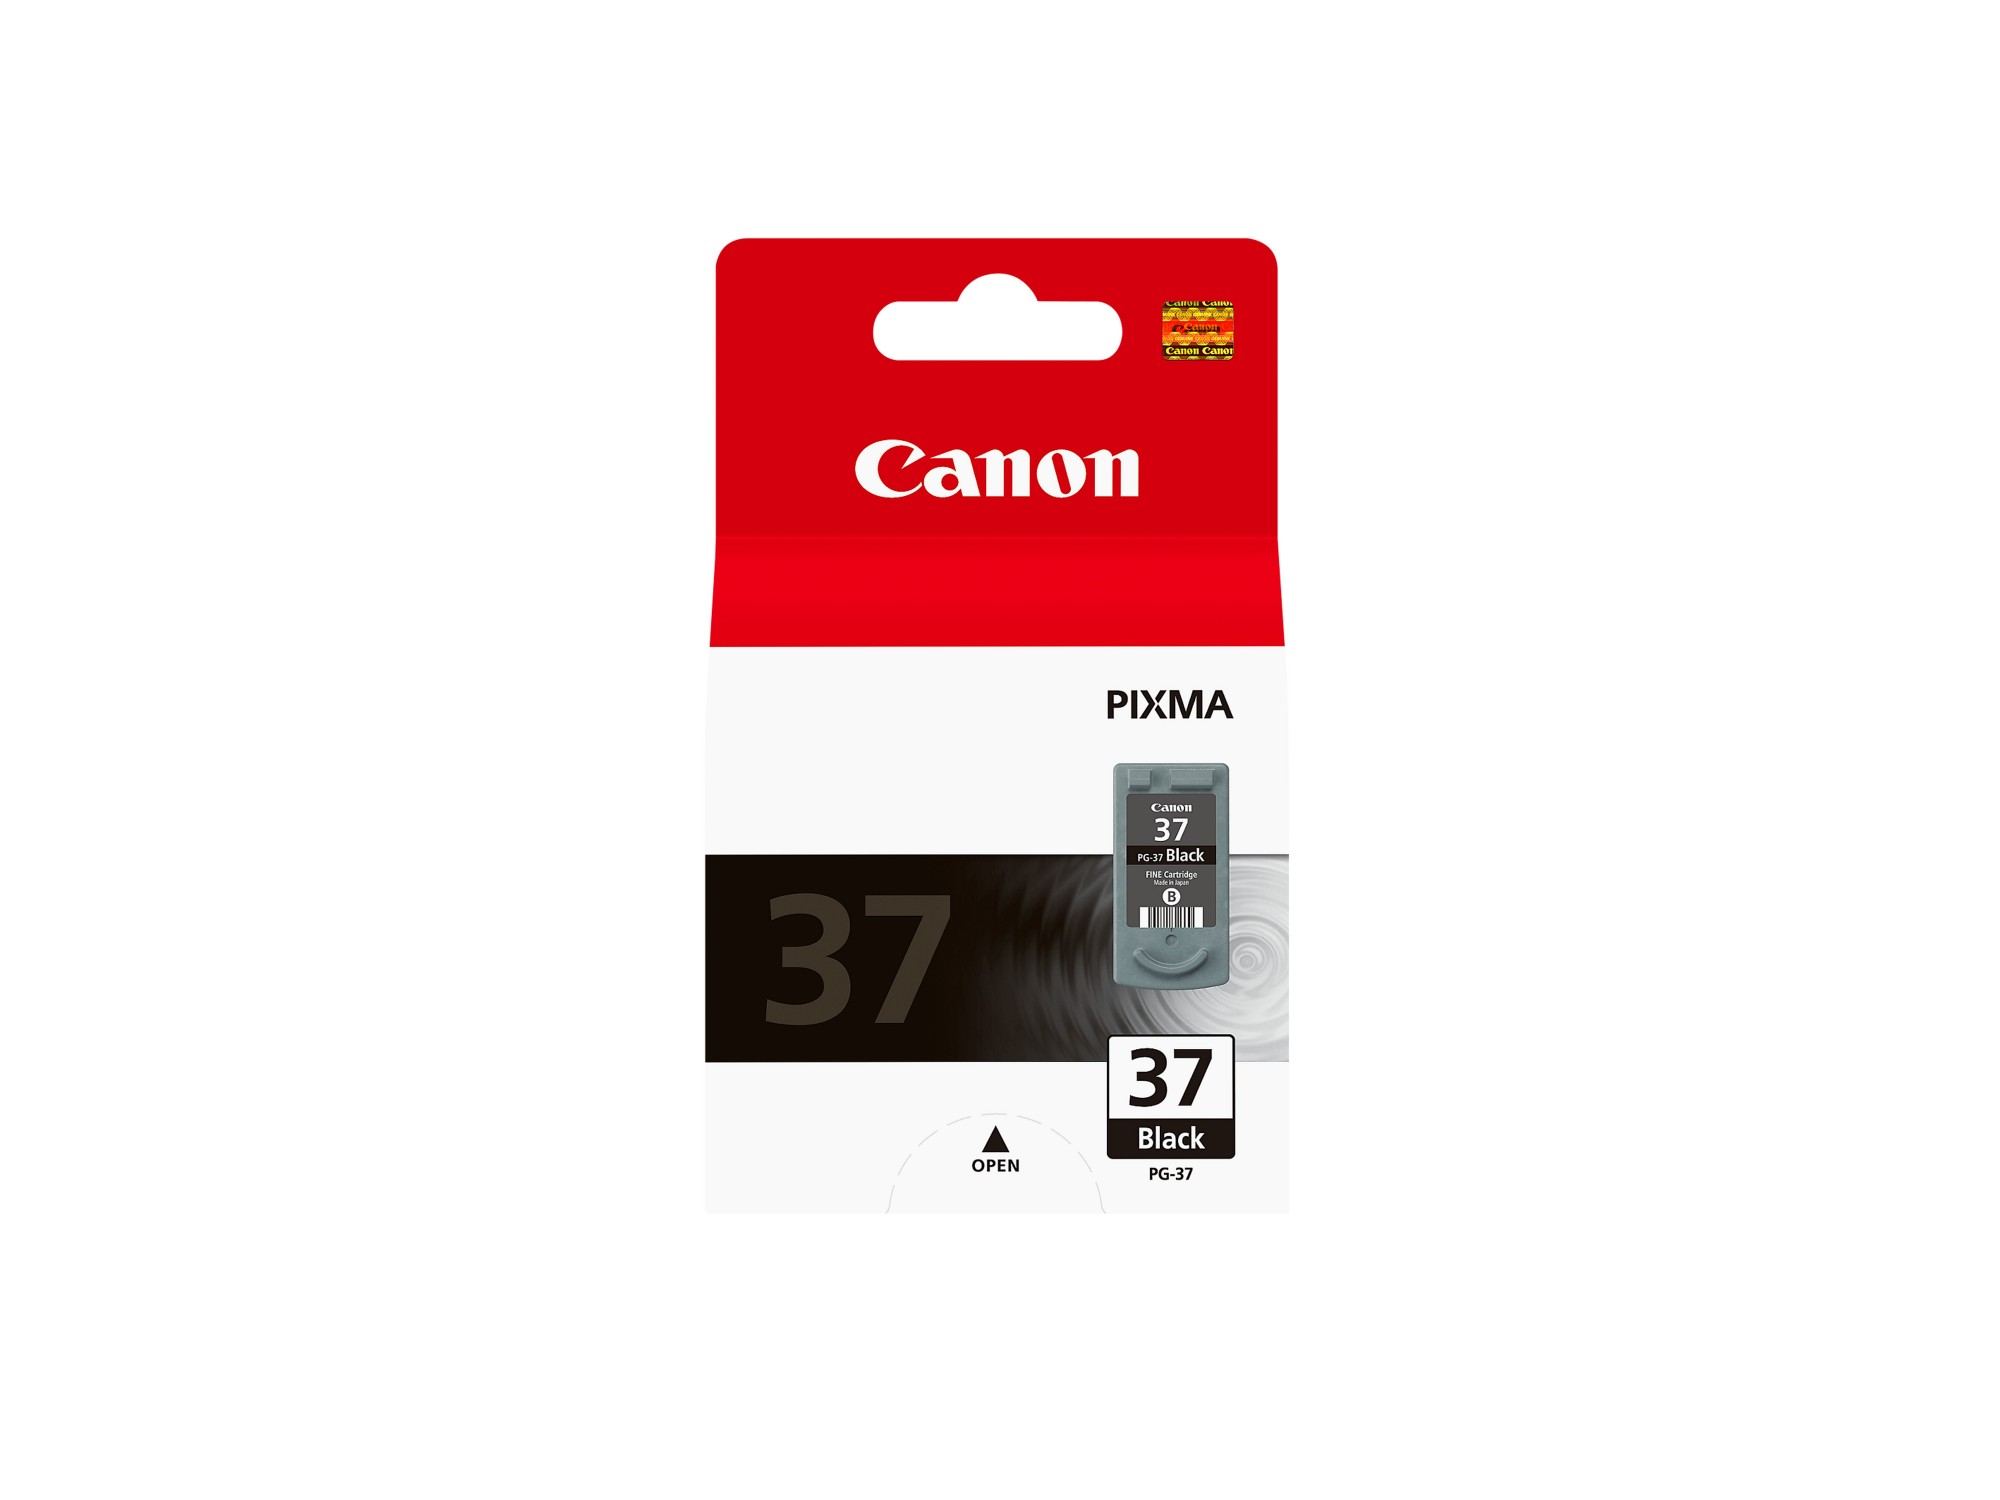 Canon 2145B001/PG-37 Printhead cartridge black, 219 pages ISO/IEC 24711 11ml for Canon Pixma IP 2500/2600/MX 300